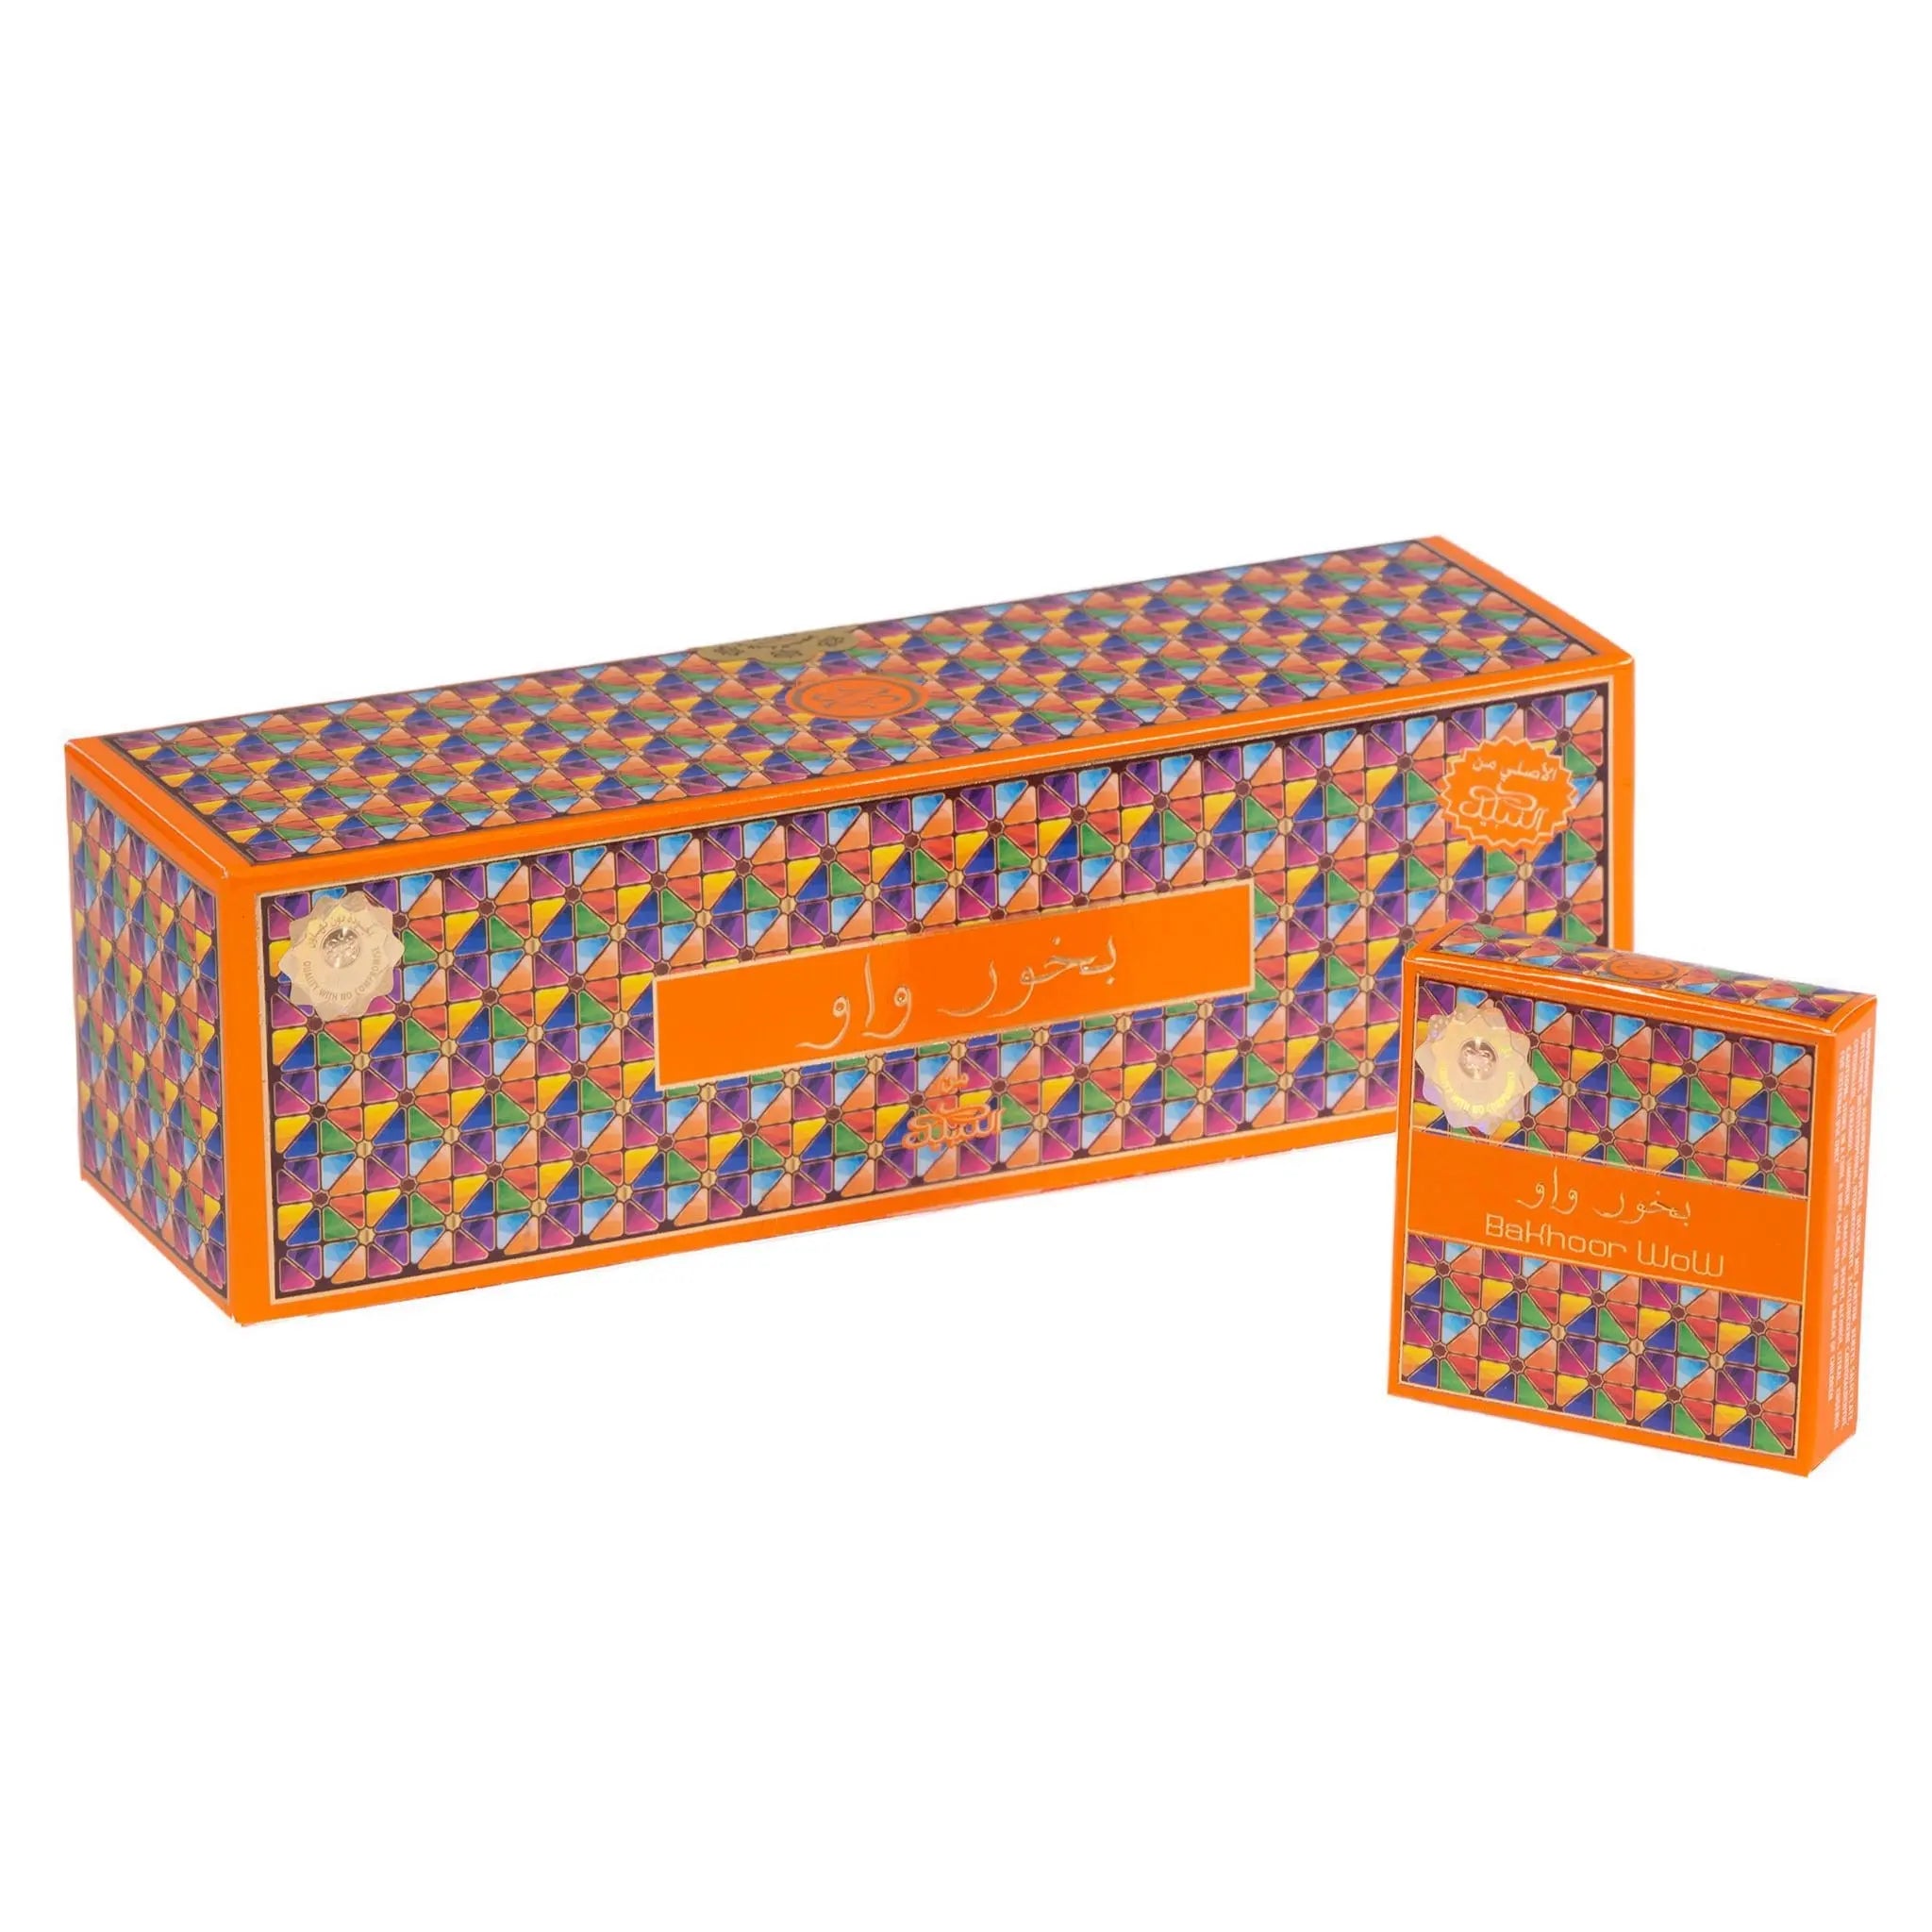 The image displays two boxes of fragrance products. The larger box is rectangular and elongated, while the smaller box is square-shaped. Both boxes have a vibrant geometric pattern. On the larger box, there is a central orange rectangle with Arabic script in white and the word "Oud" in smaller text below. The smaller box features the same design and has "Bakhoor Wow" written in English and Arabic script on the lower part of the box.